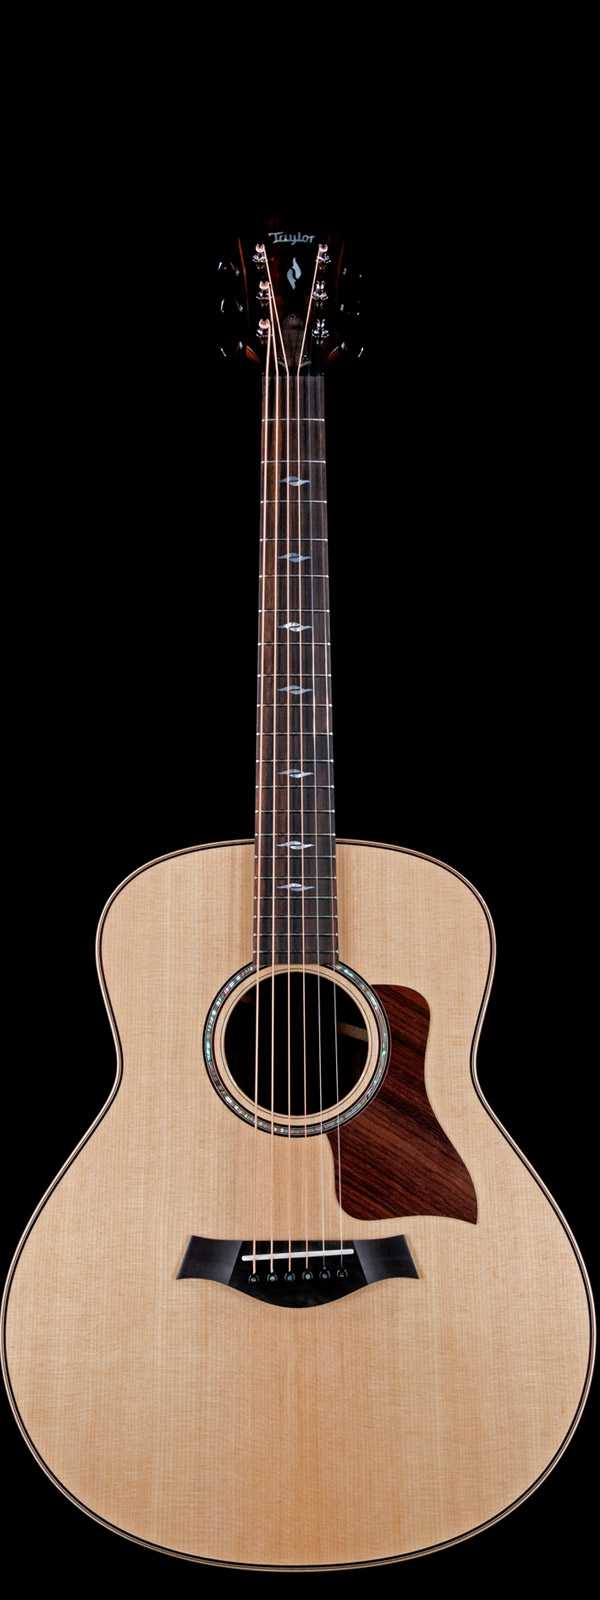 Taylor GT 811 Acoustic Indian Rosewood Body Ebony Board Natural